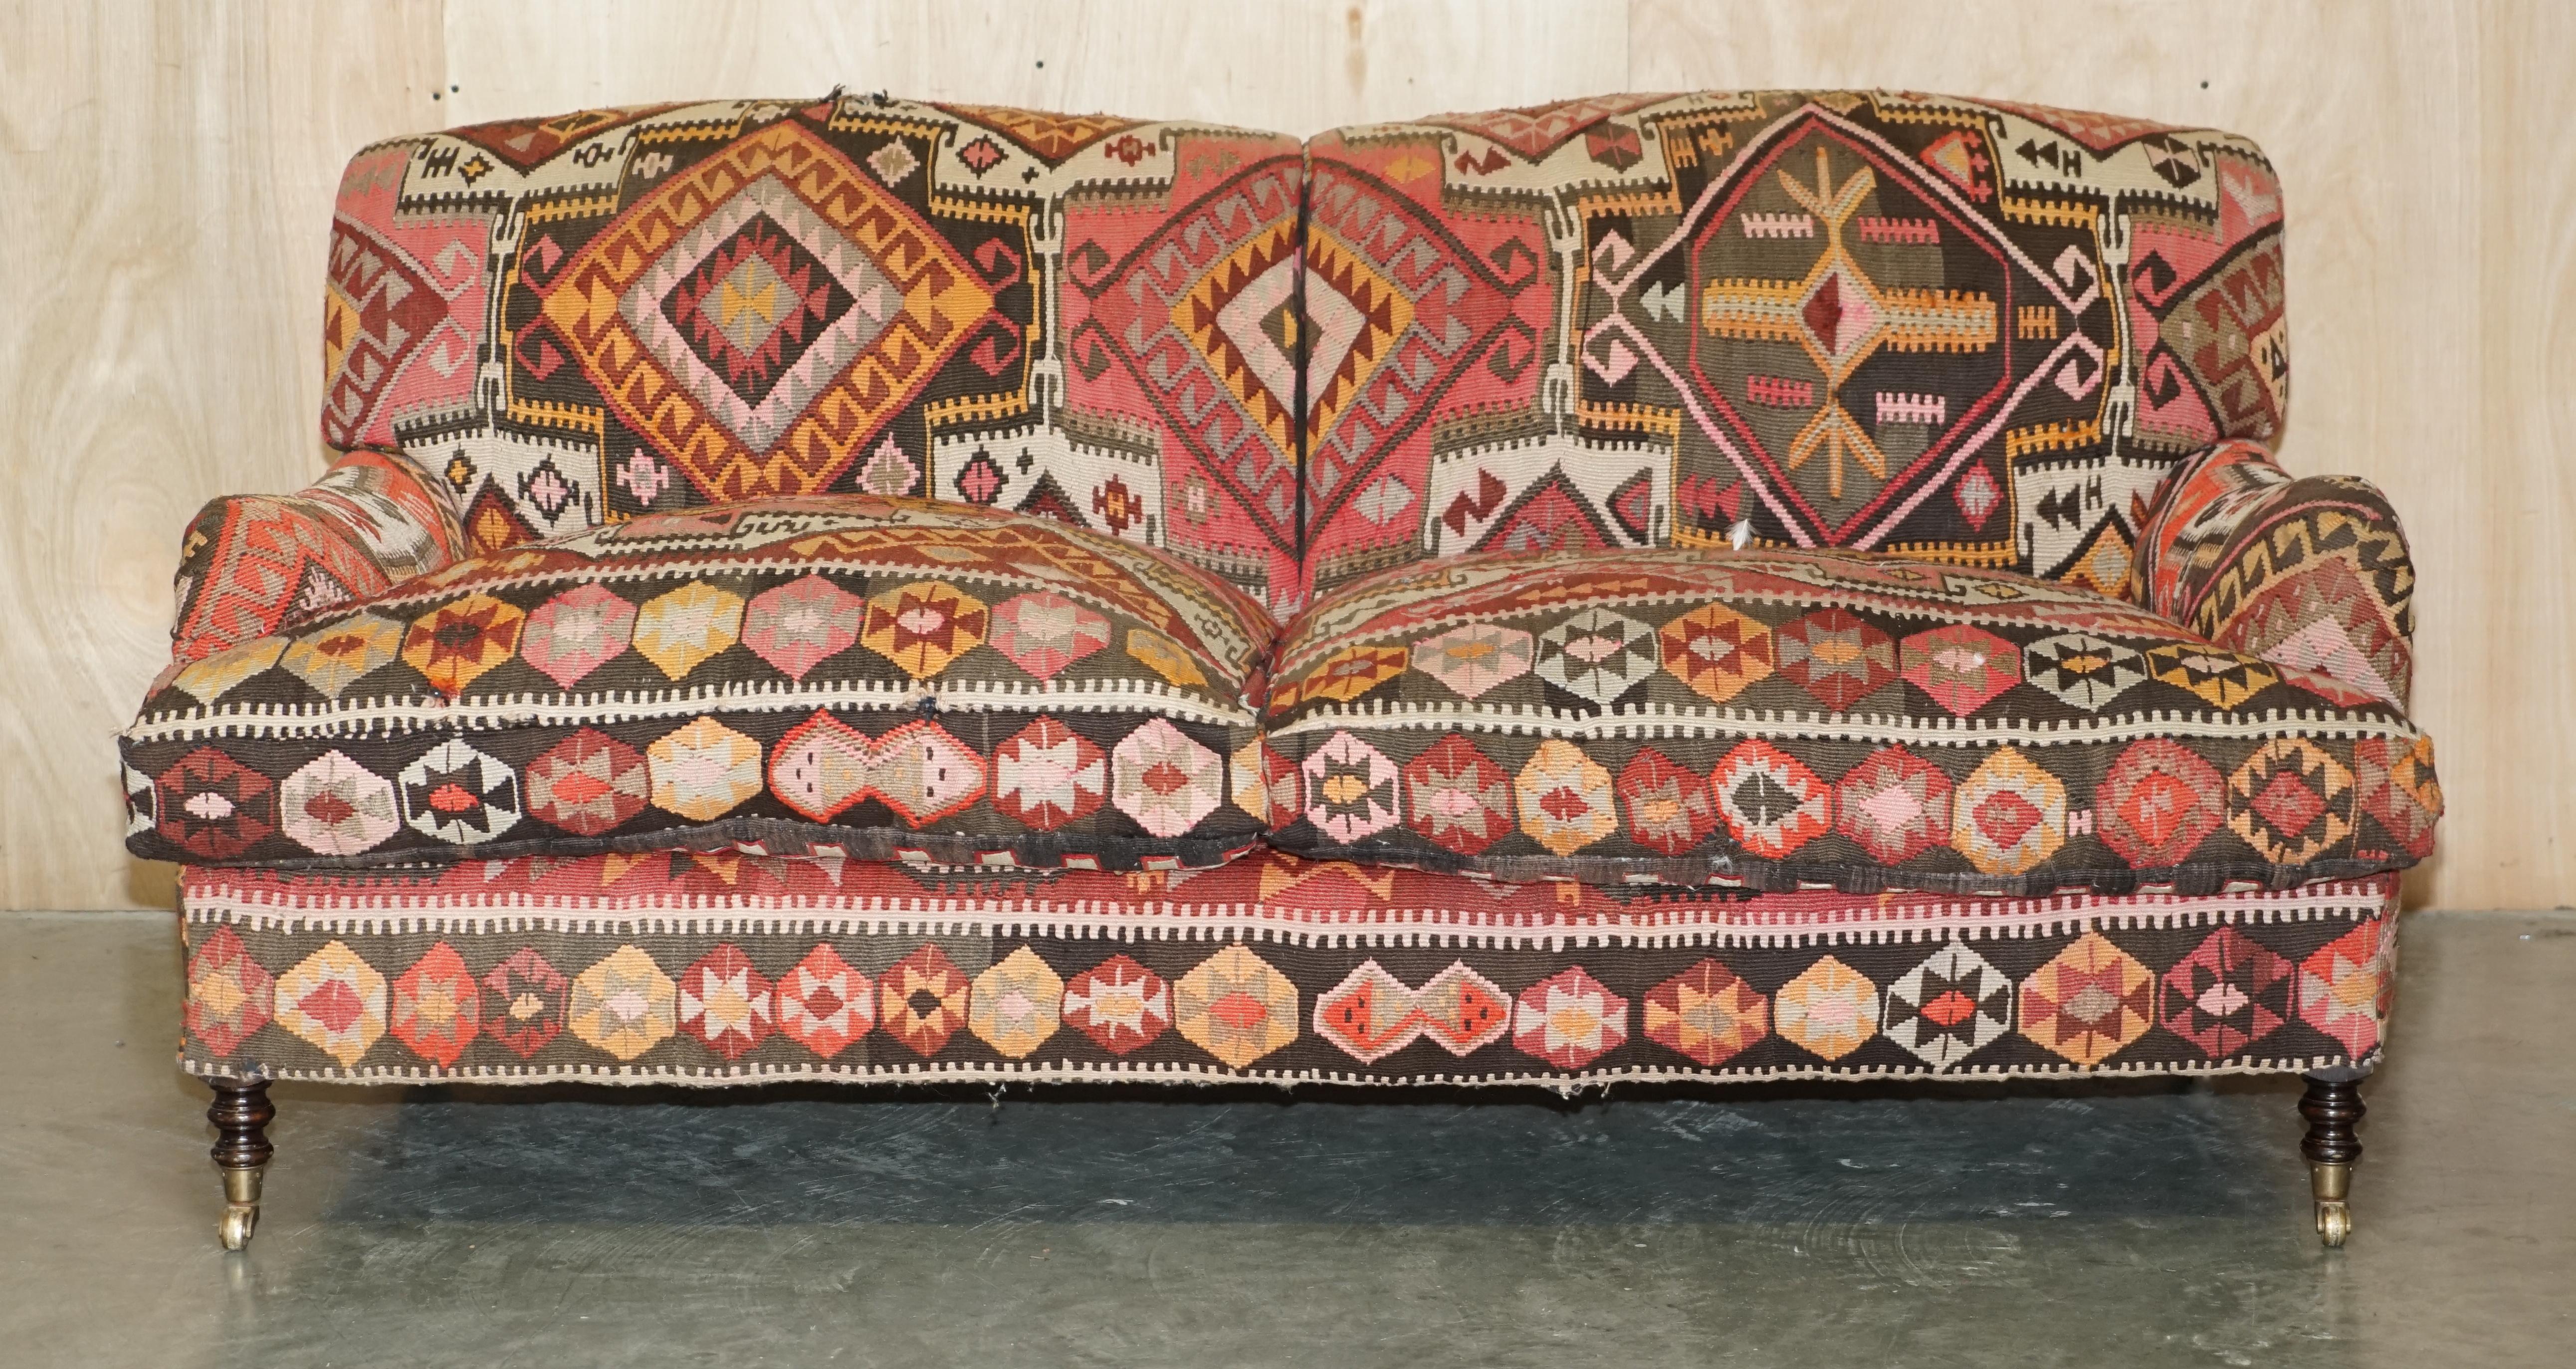 Royal House Antiques

Royal House Antiques is delighted to offer for sale this sublime original George Smith signature collection standard arm three-seat sofa upholstered with Aztec Kilims

Please note the delivery fee listed is just a guide, it